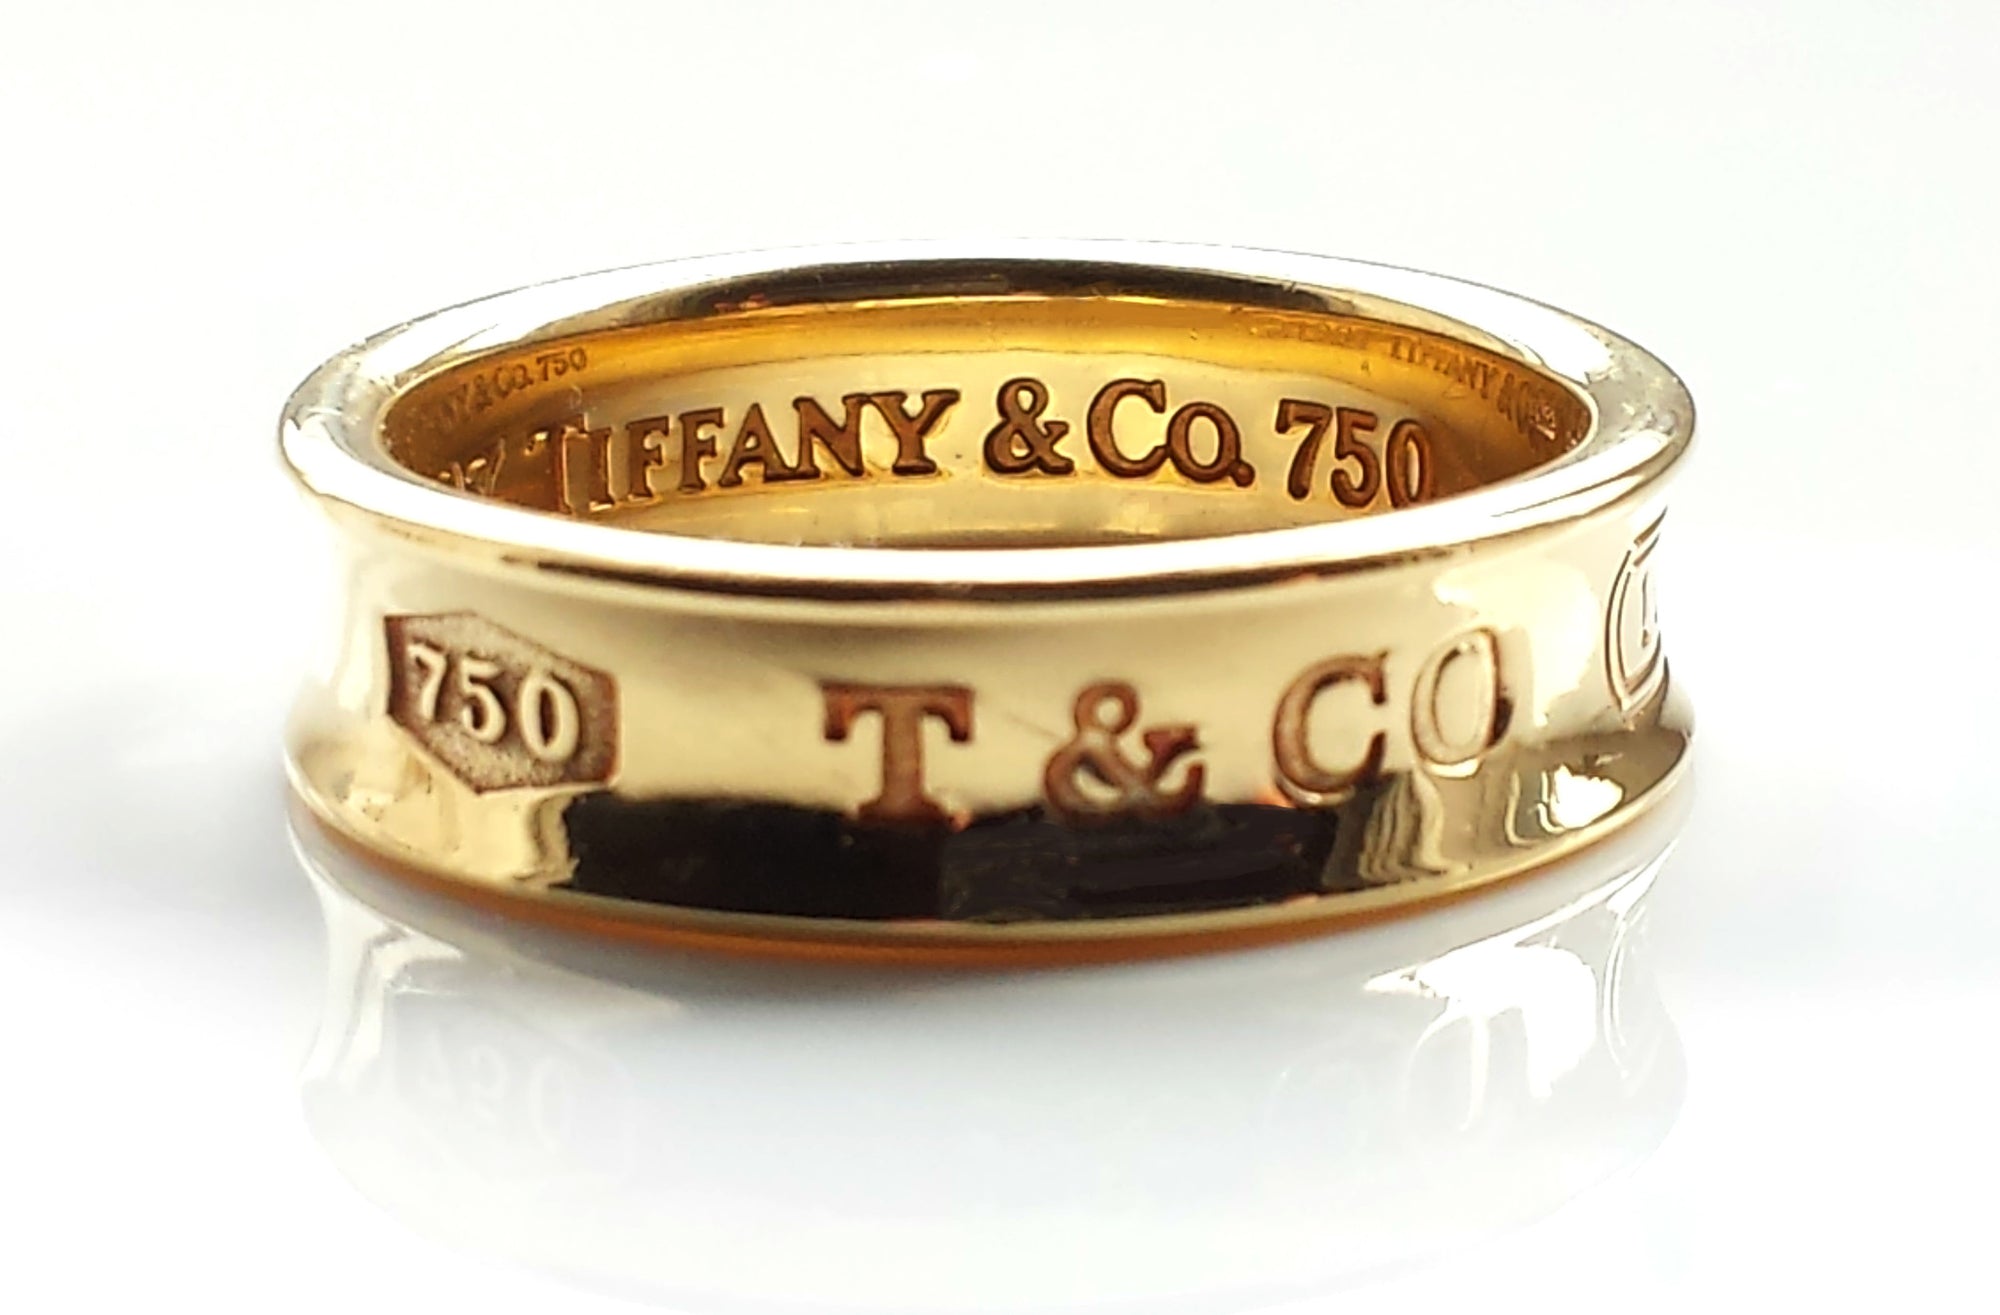 Tiffany & Co 1837 18k Yellow Gold Wide Ring 6mm Ring SZ 9 (R)